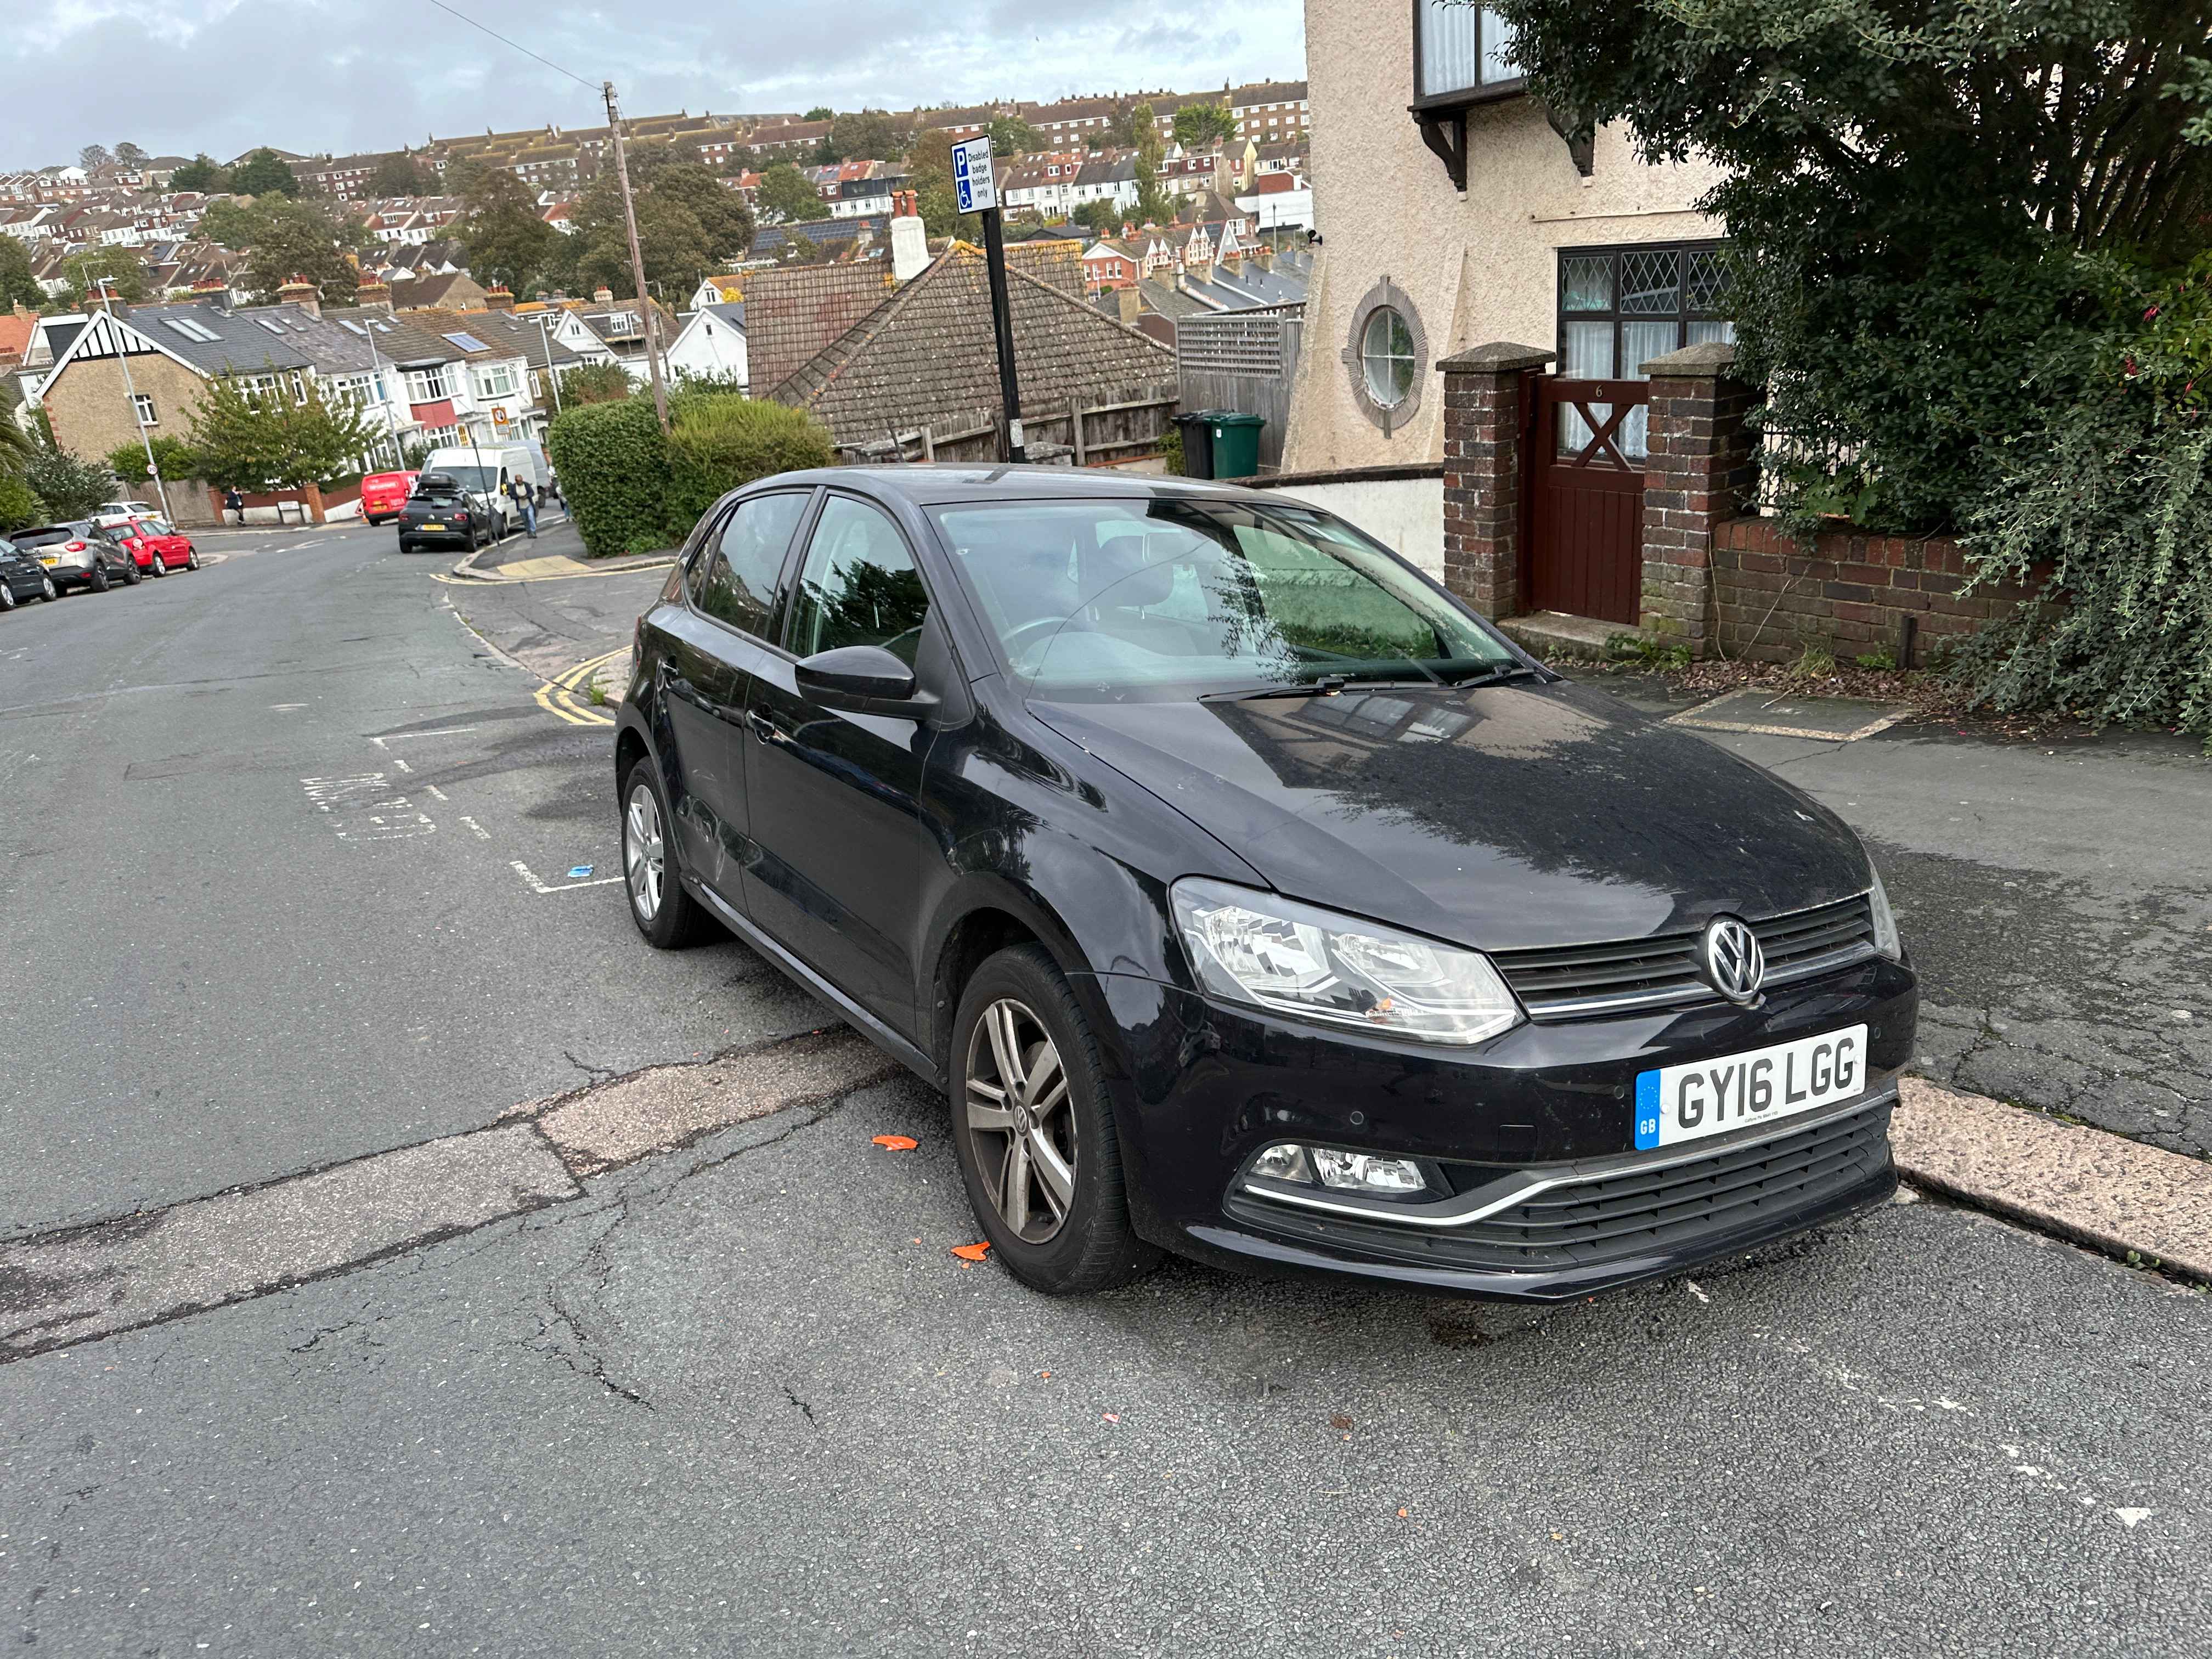 Photograph of GY16 LGG - a Black Volkswagen Polo parked in Hollingdean by a non-resident. The third of five photographs supplied by the residents of Hollingdean.